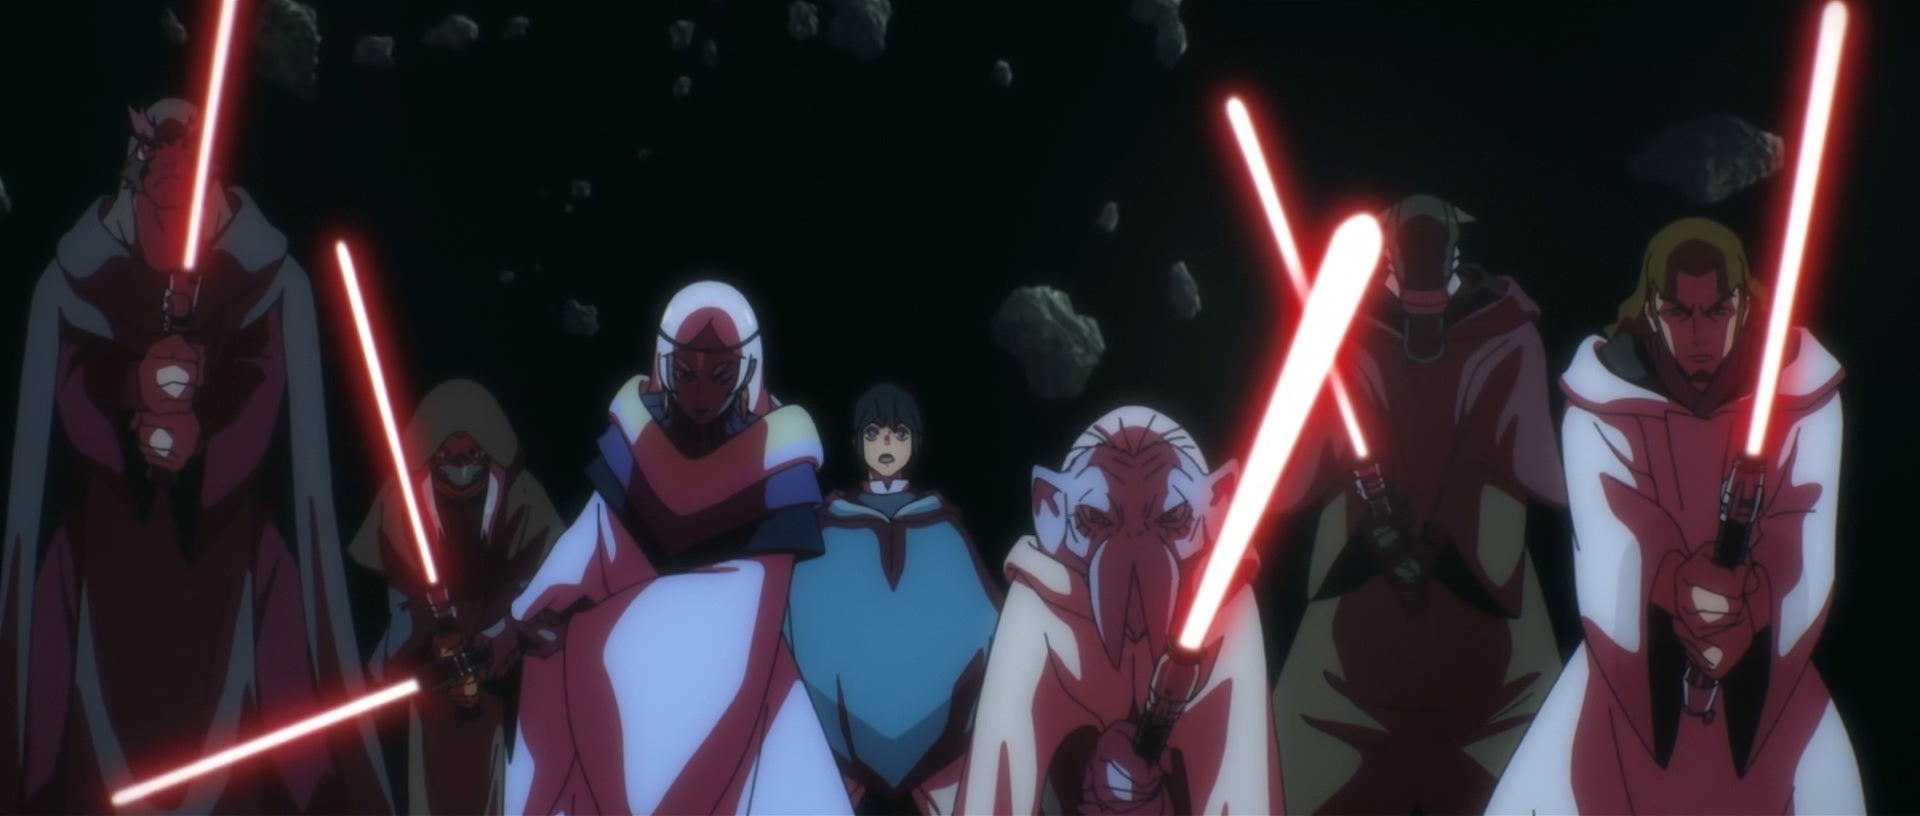 Still image form animated Star Wars show Visions